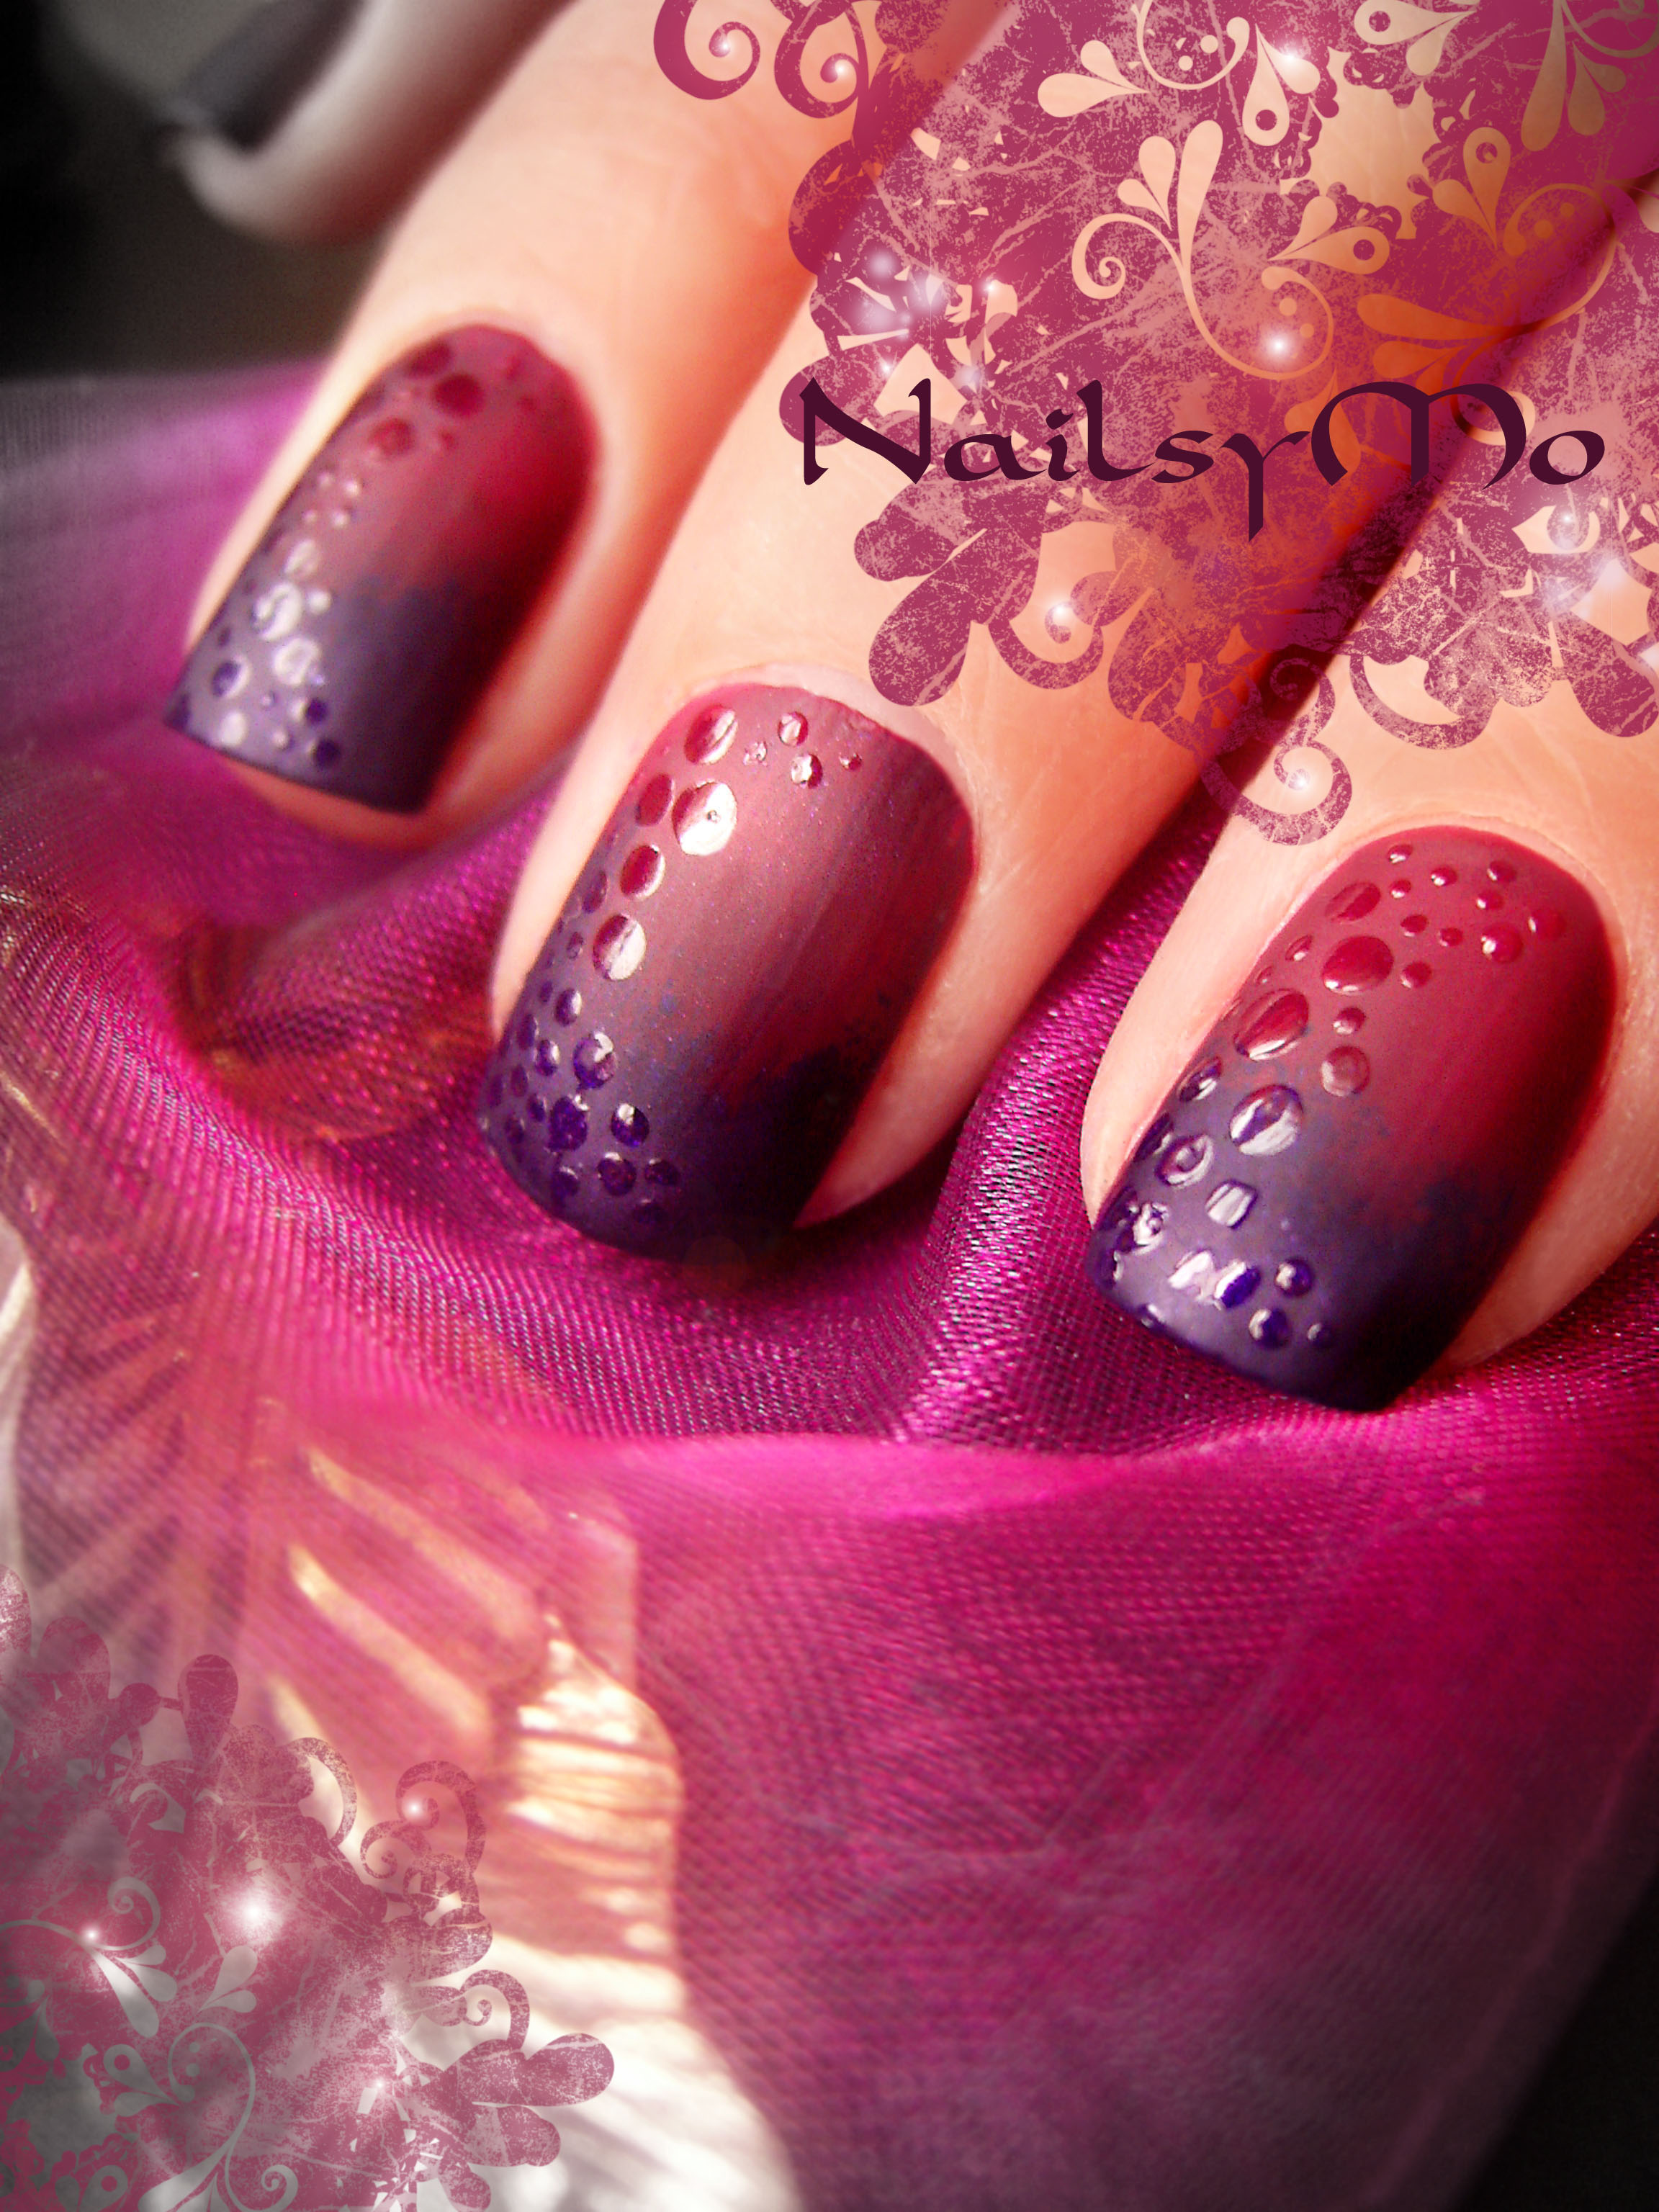 Then I apply one matte nail polish coat. Then I take dotting tool and with